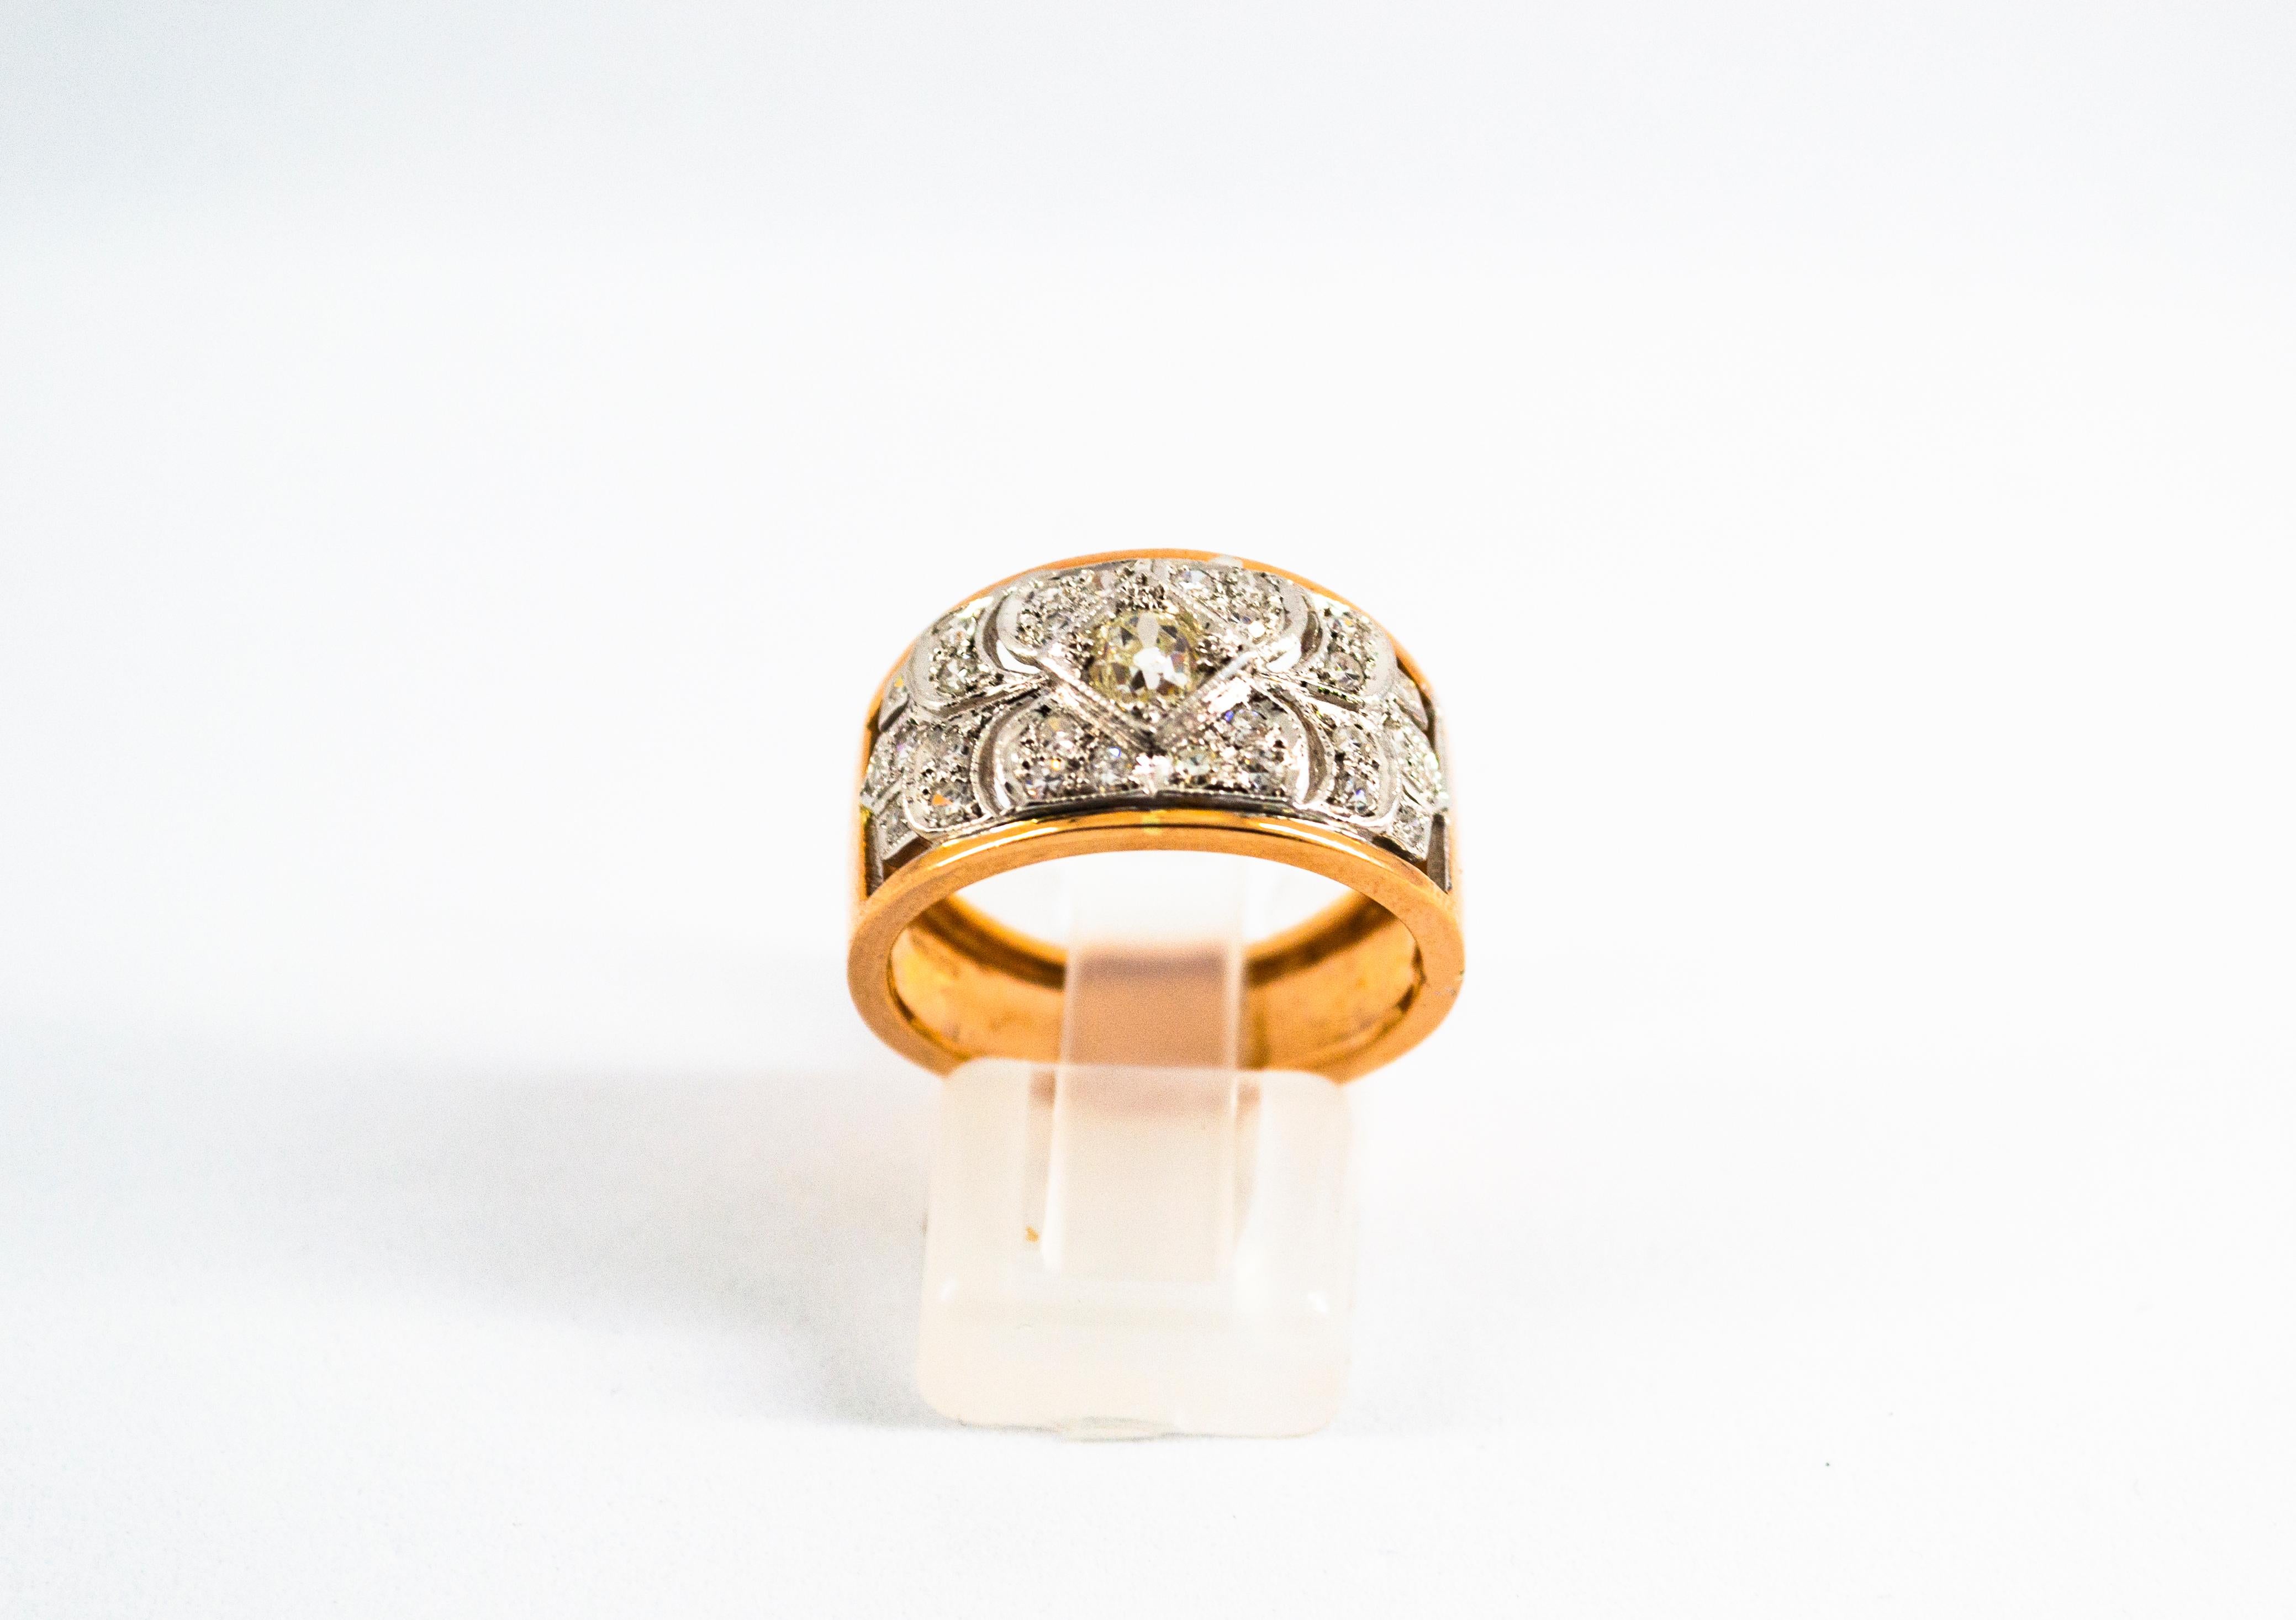 This Ring is made of 14K Yellow Gold.
This Ring has 0.65 Carats White Diamonds.
Size ITA: 15 USA: 7
We're a workshop so every piece is handmade, customizable and resizable.